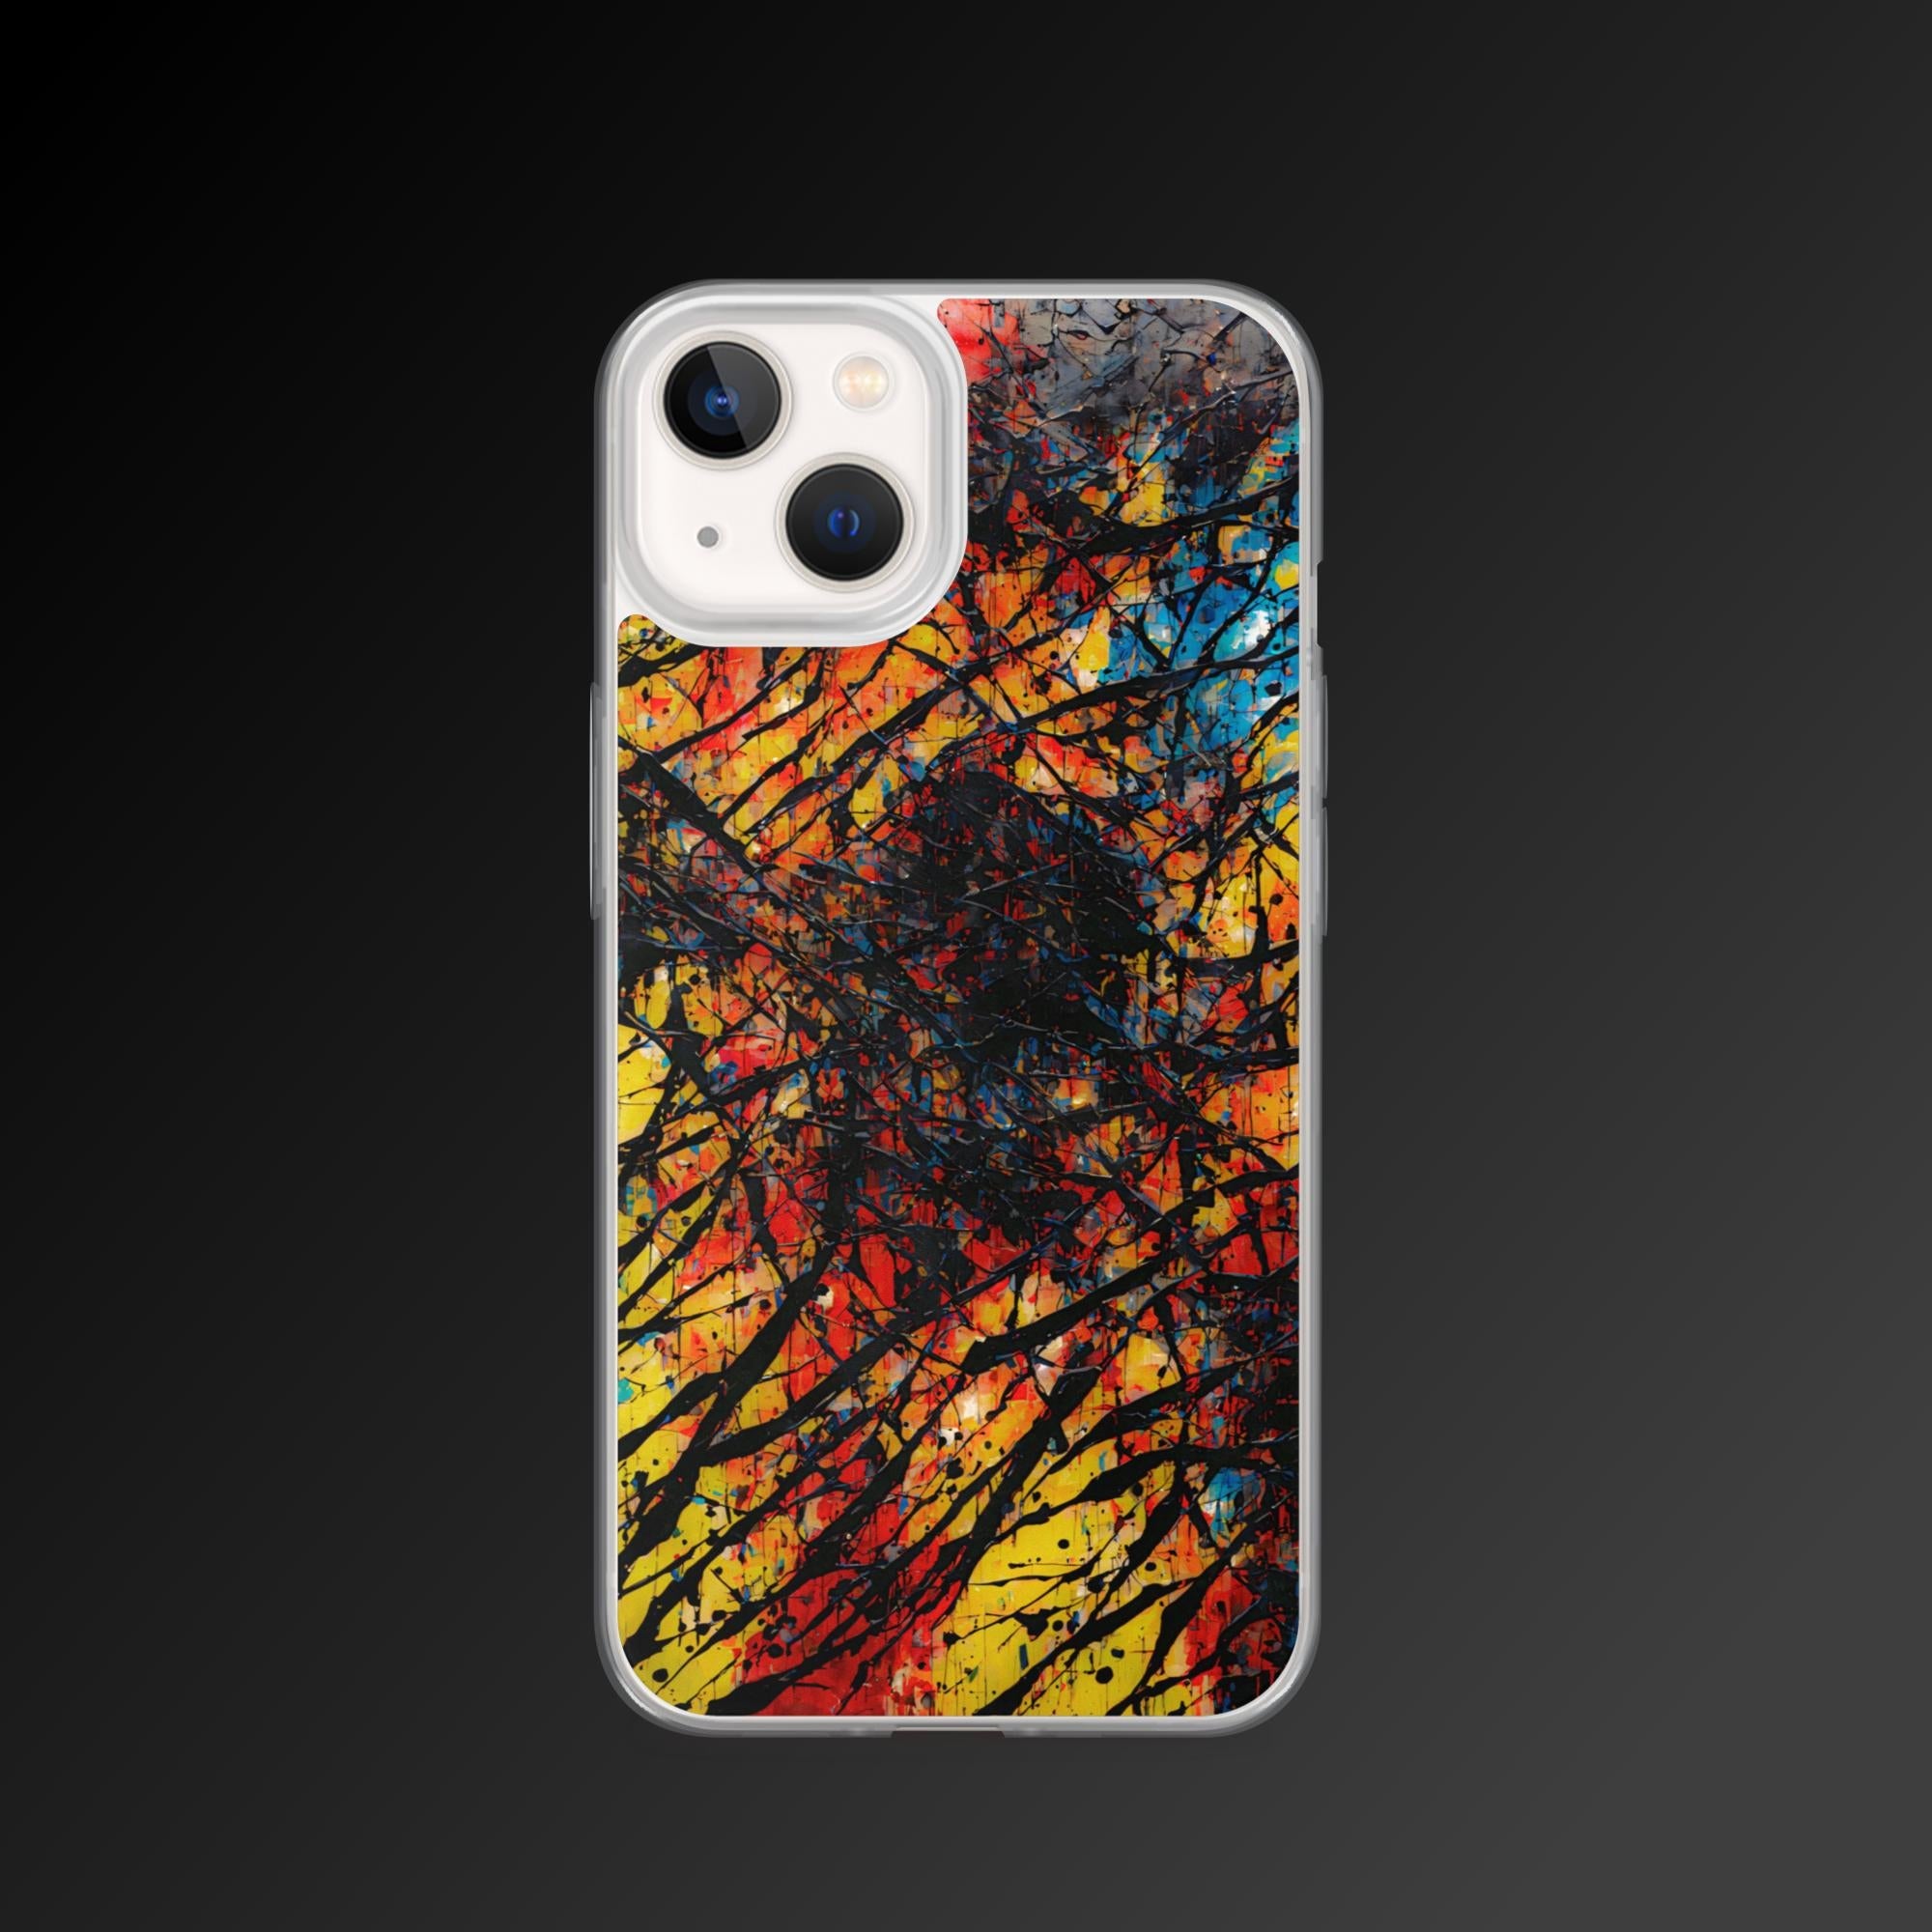 "Deep havoc" clear iphone case - Clear iphone case - Ever colorful